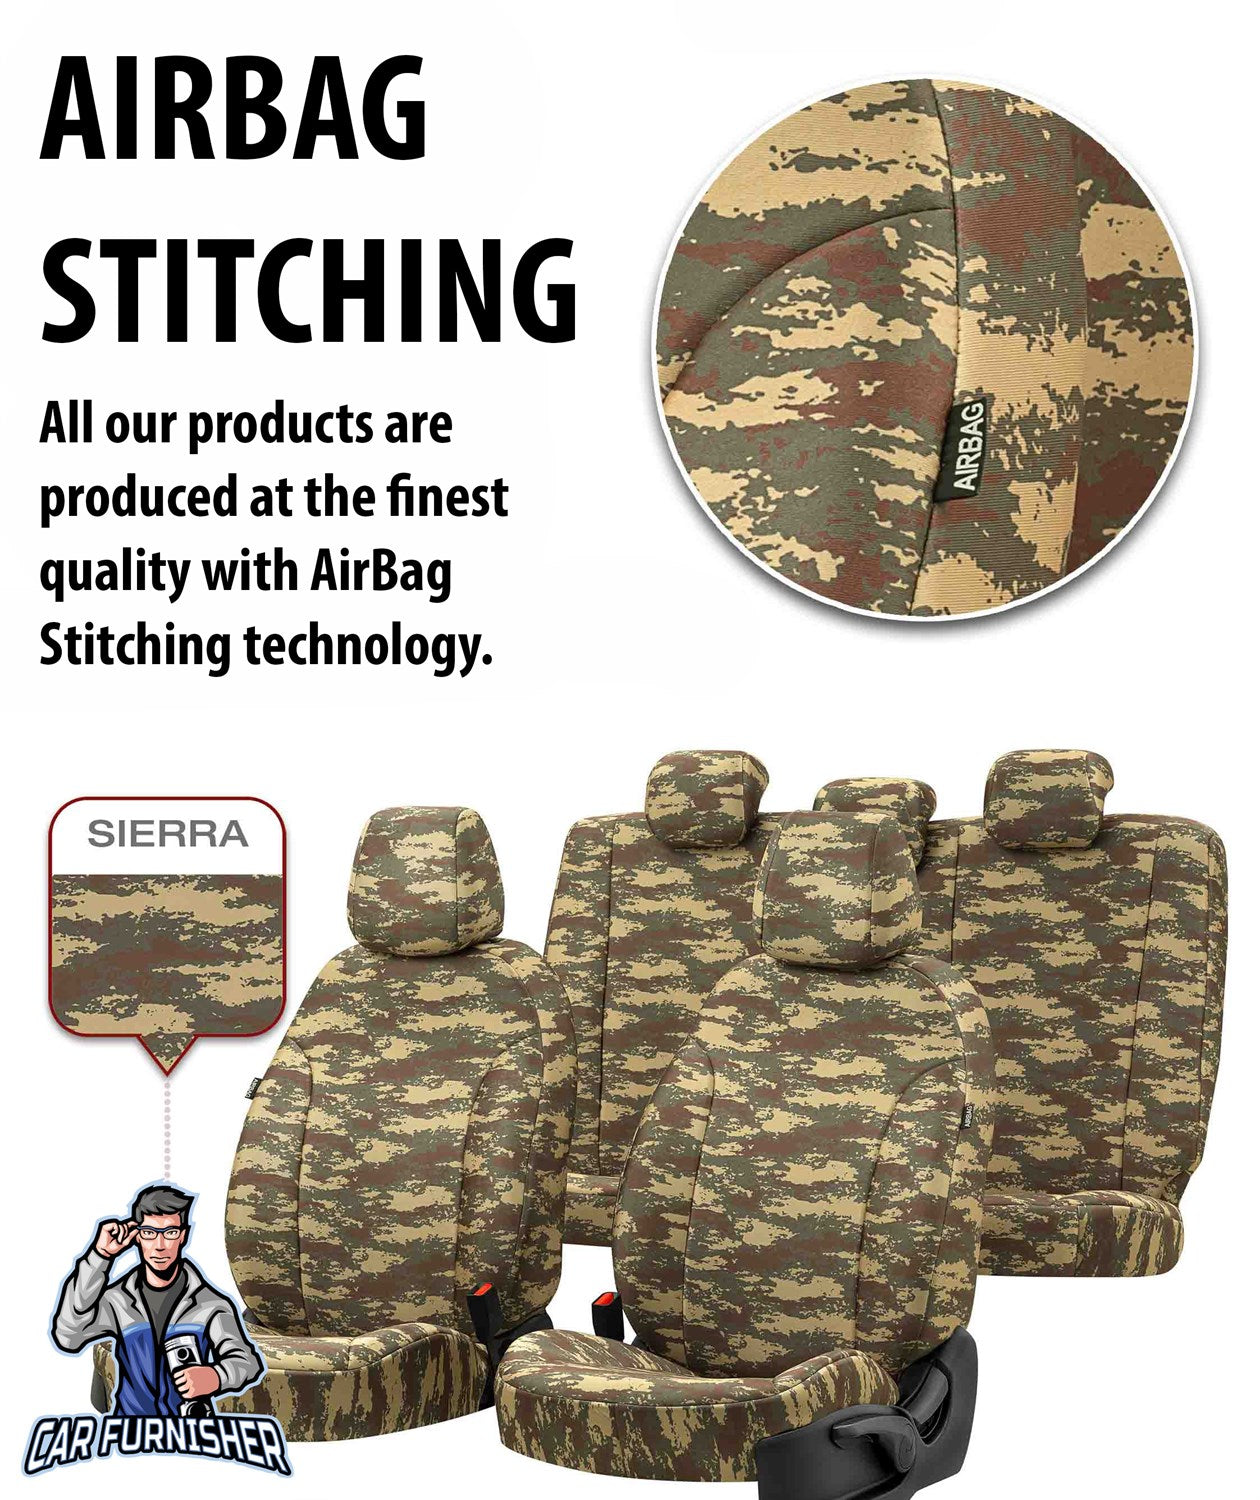 Iveco Daily Seat Covers Camouflage Waterproof Design Everest Camo Waterproof Fabric